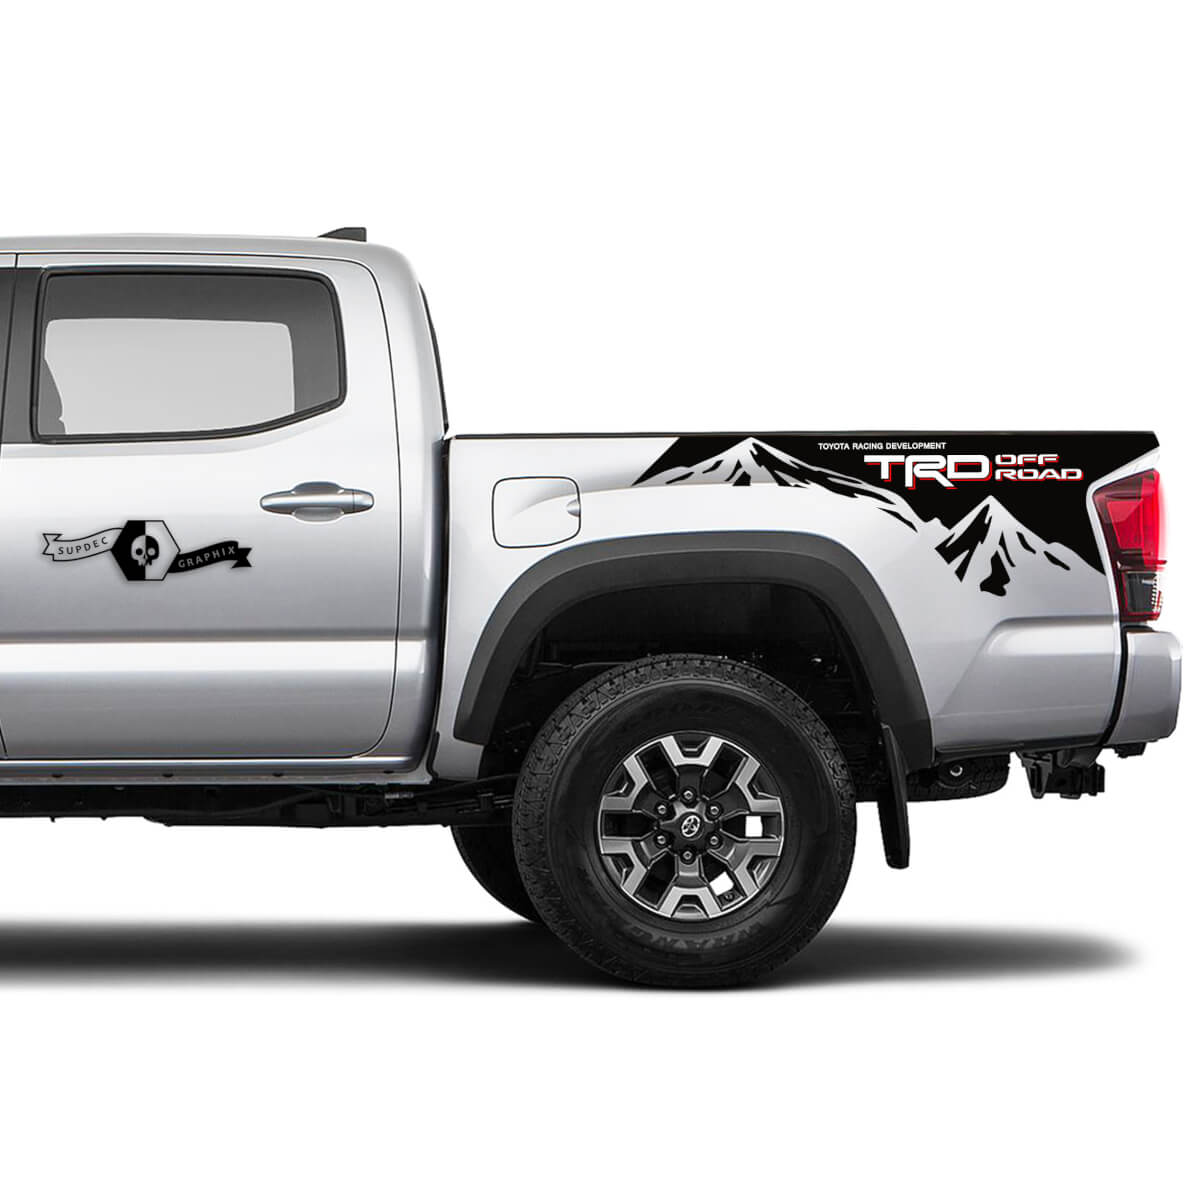 2 TRD Off Road Side Tailgate Bed Mountain Vinyl Stickers TOYOTA shadow Decals Stickers for Tacoma Tundra 4Runner Hilux